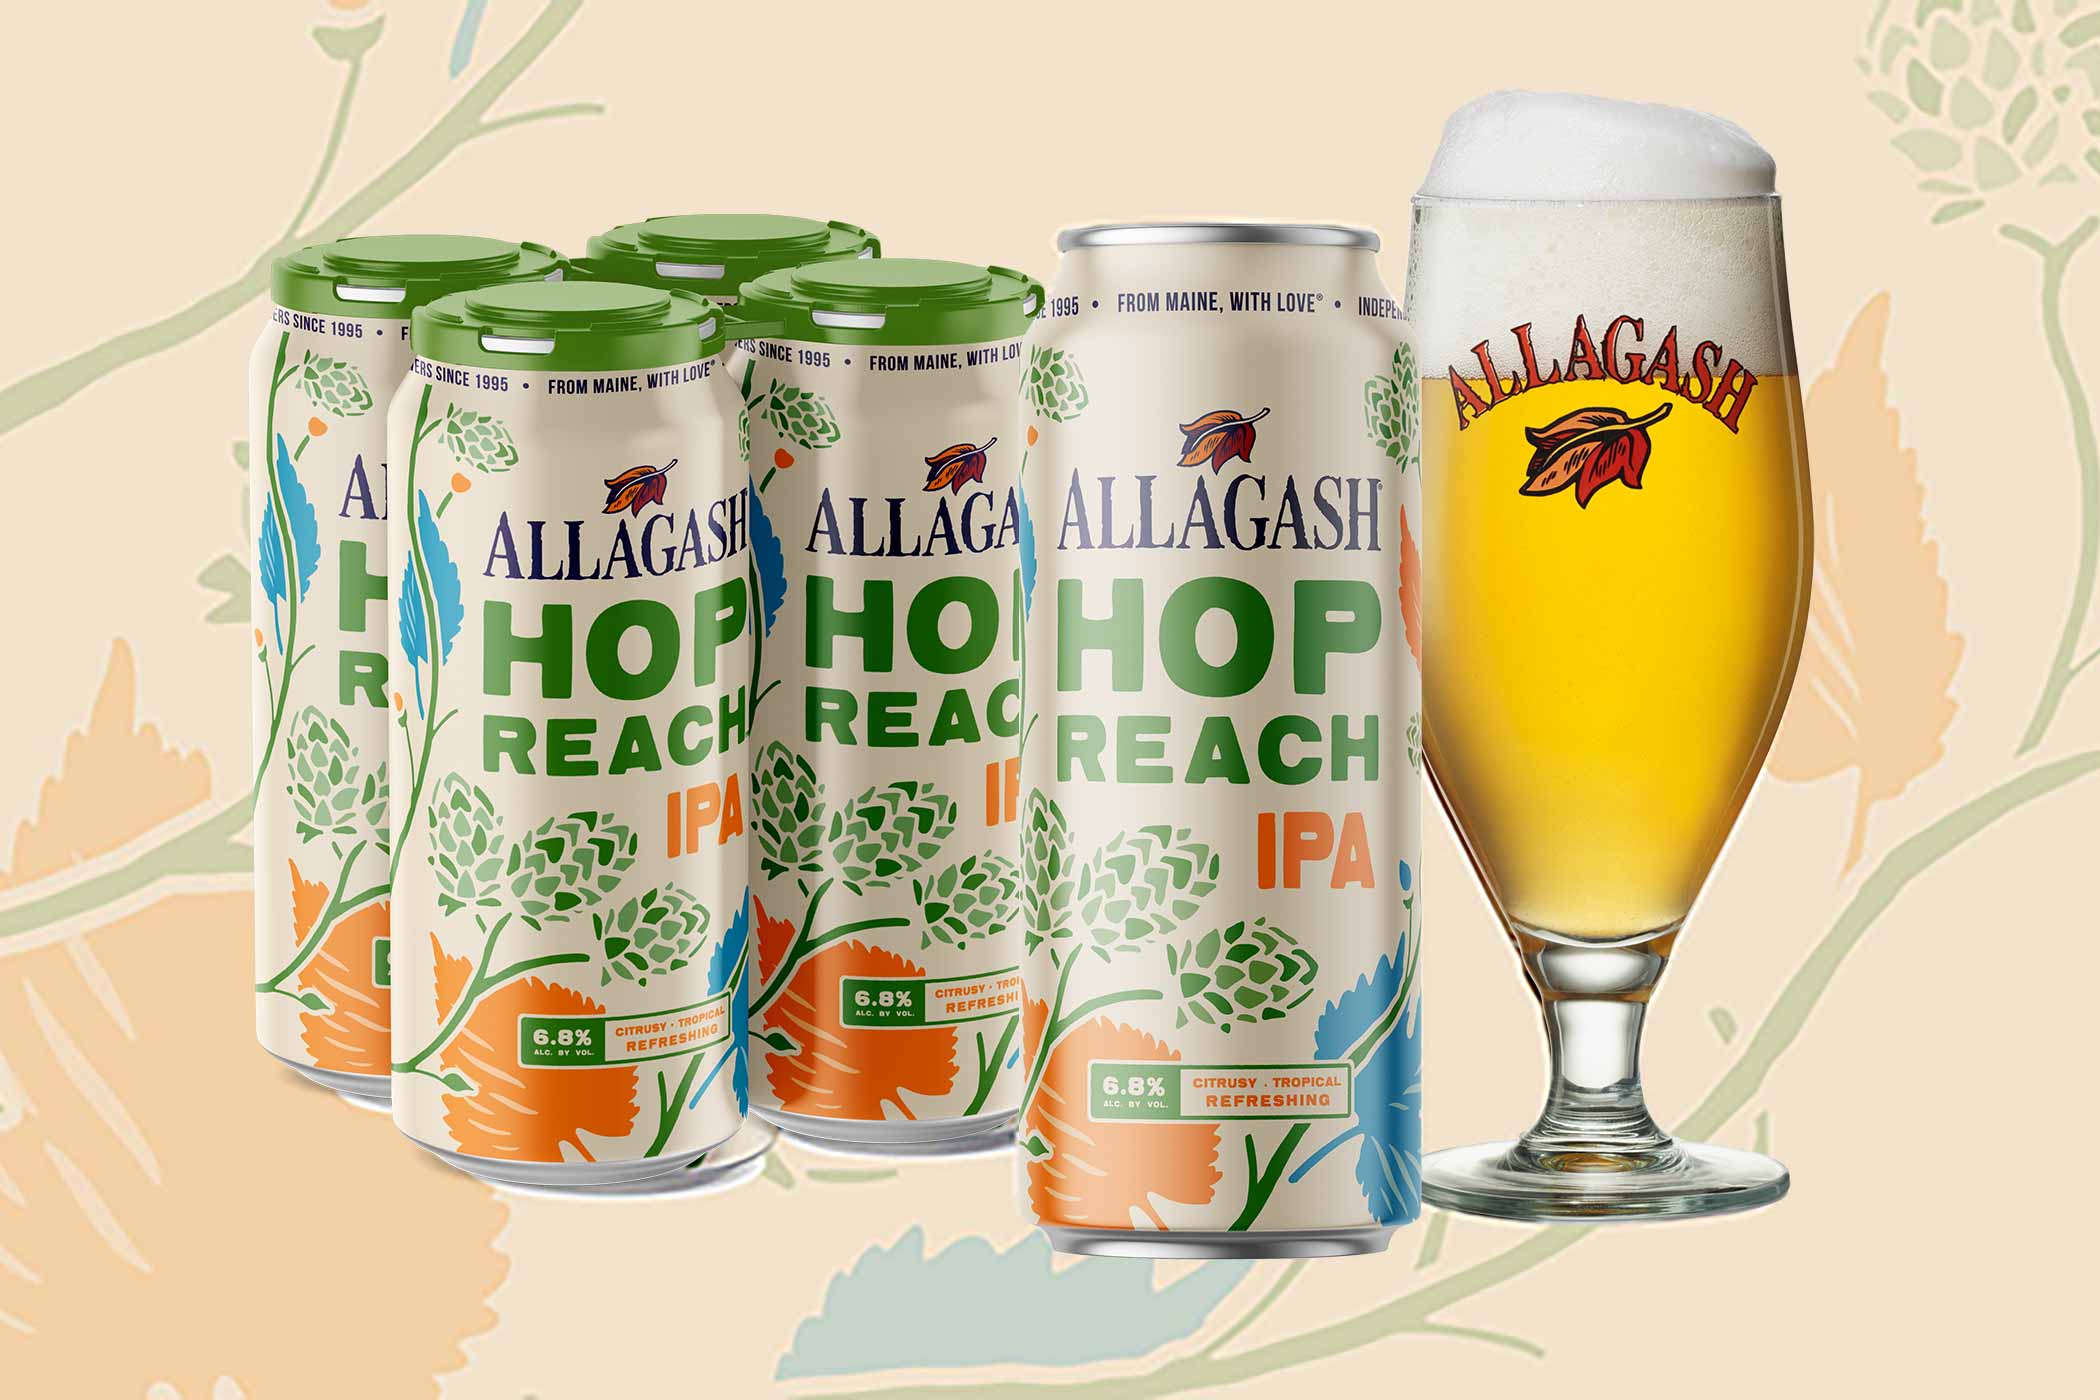 Allagash Branches Out with Release of New Year-Round IPA, Hop Reach